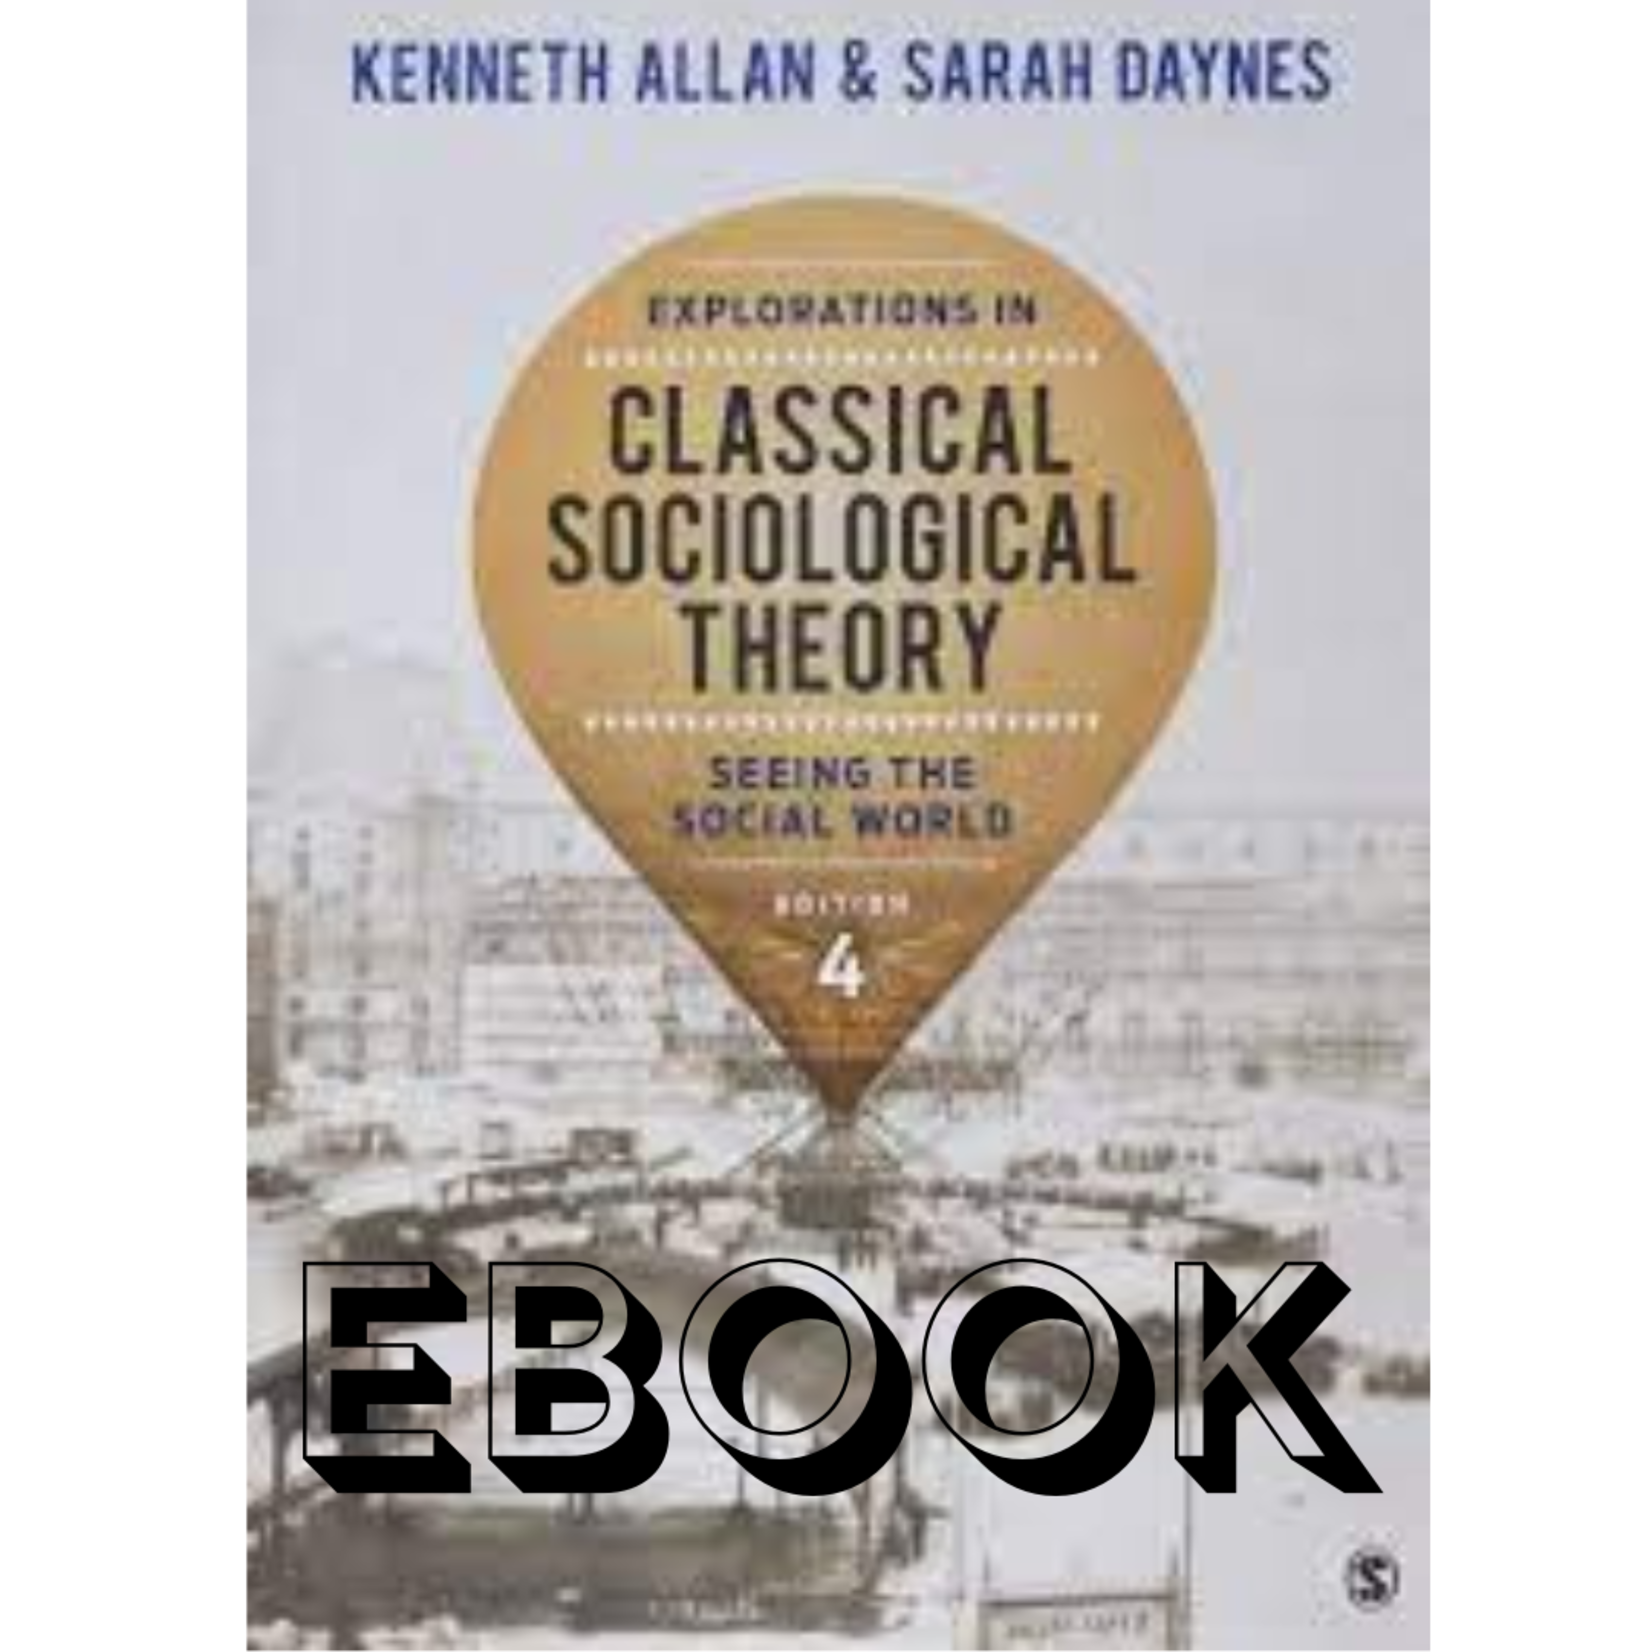 Sage Explorations in Classical Sociological Theory EBOOK